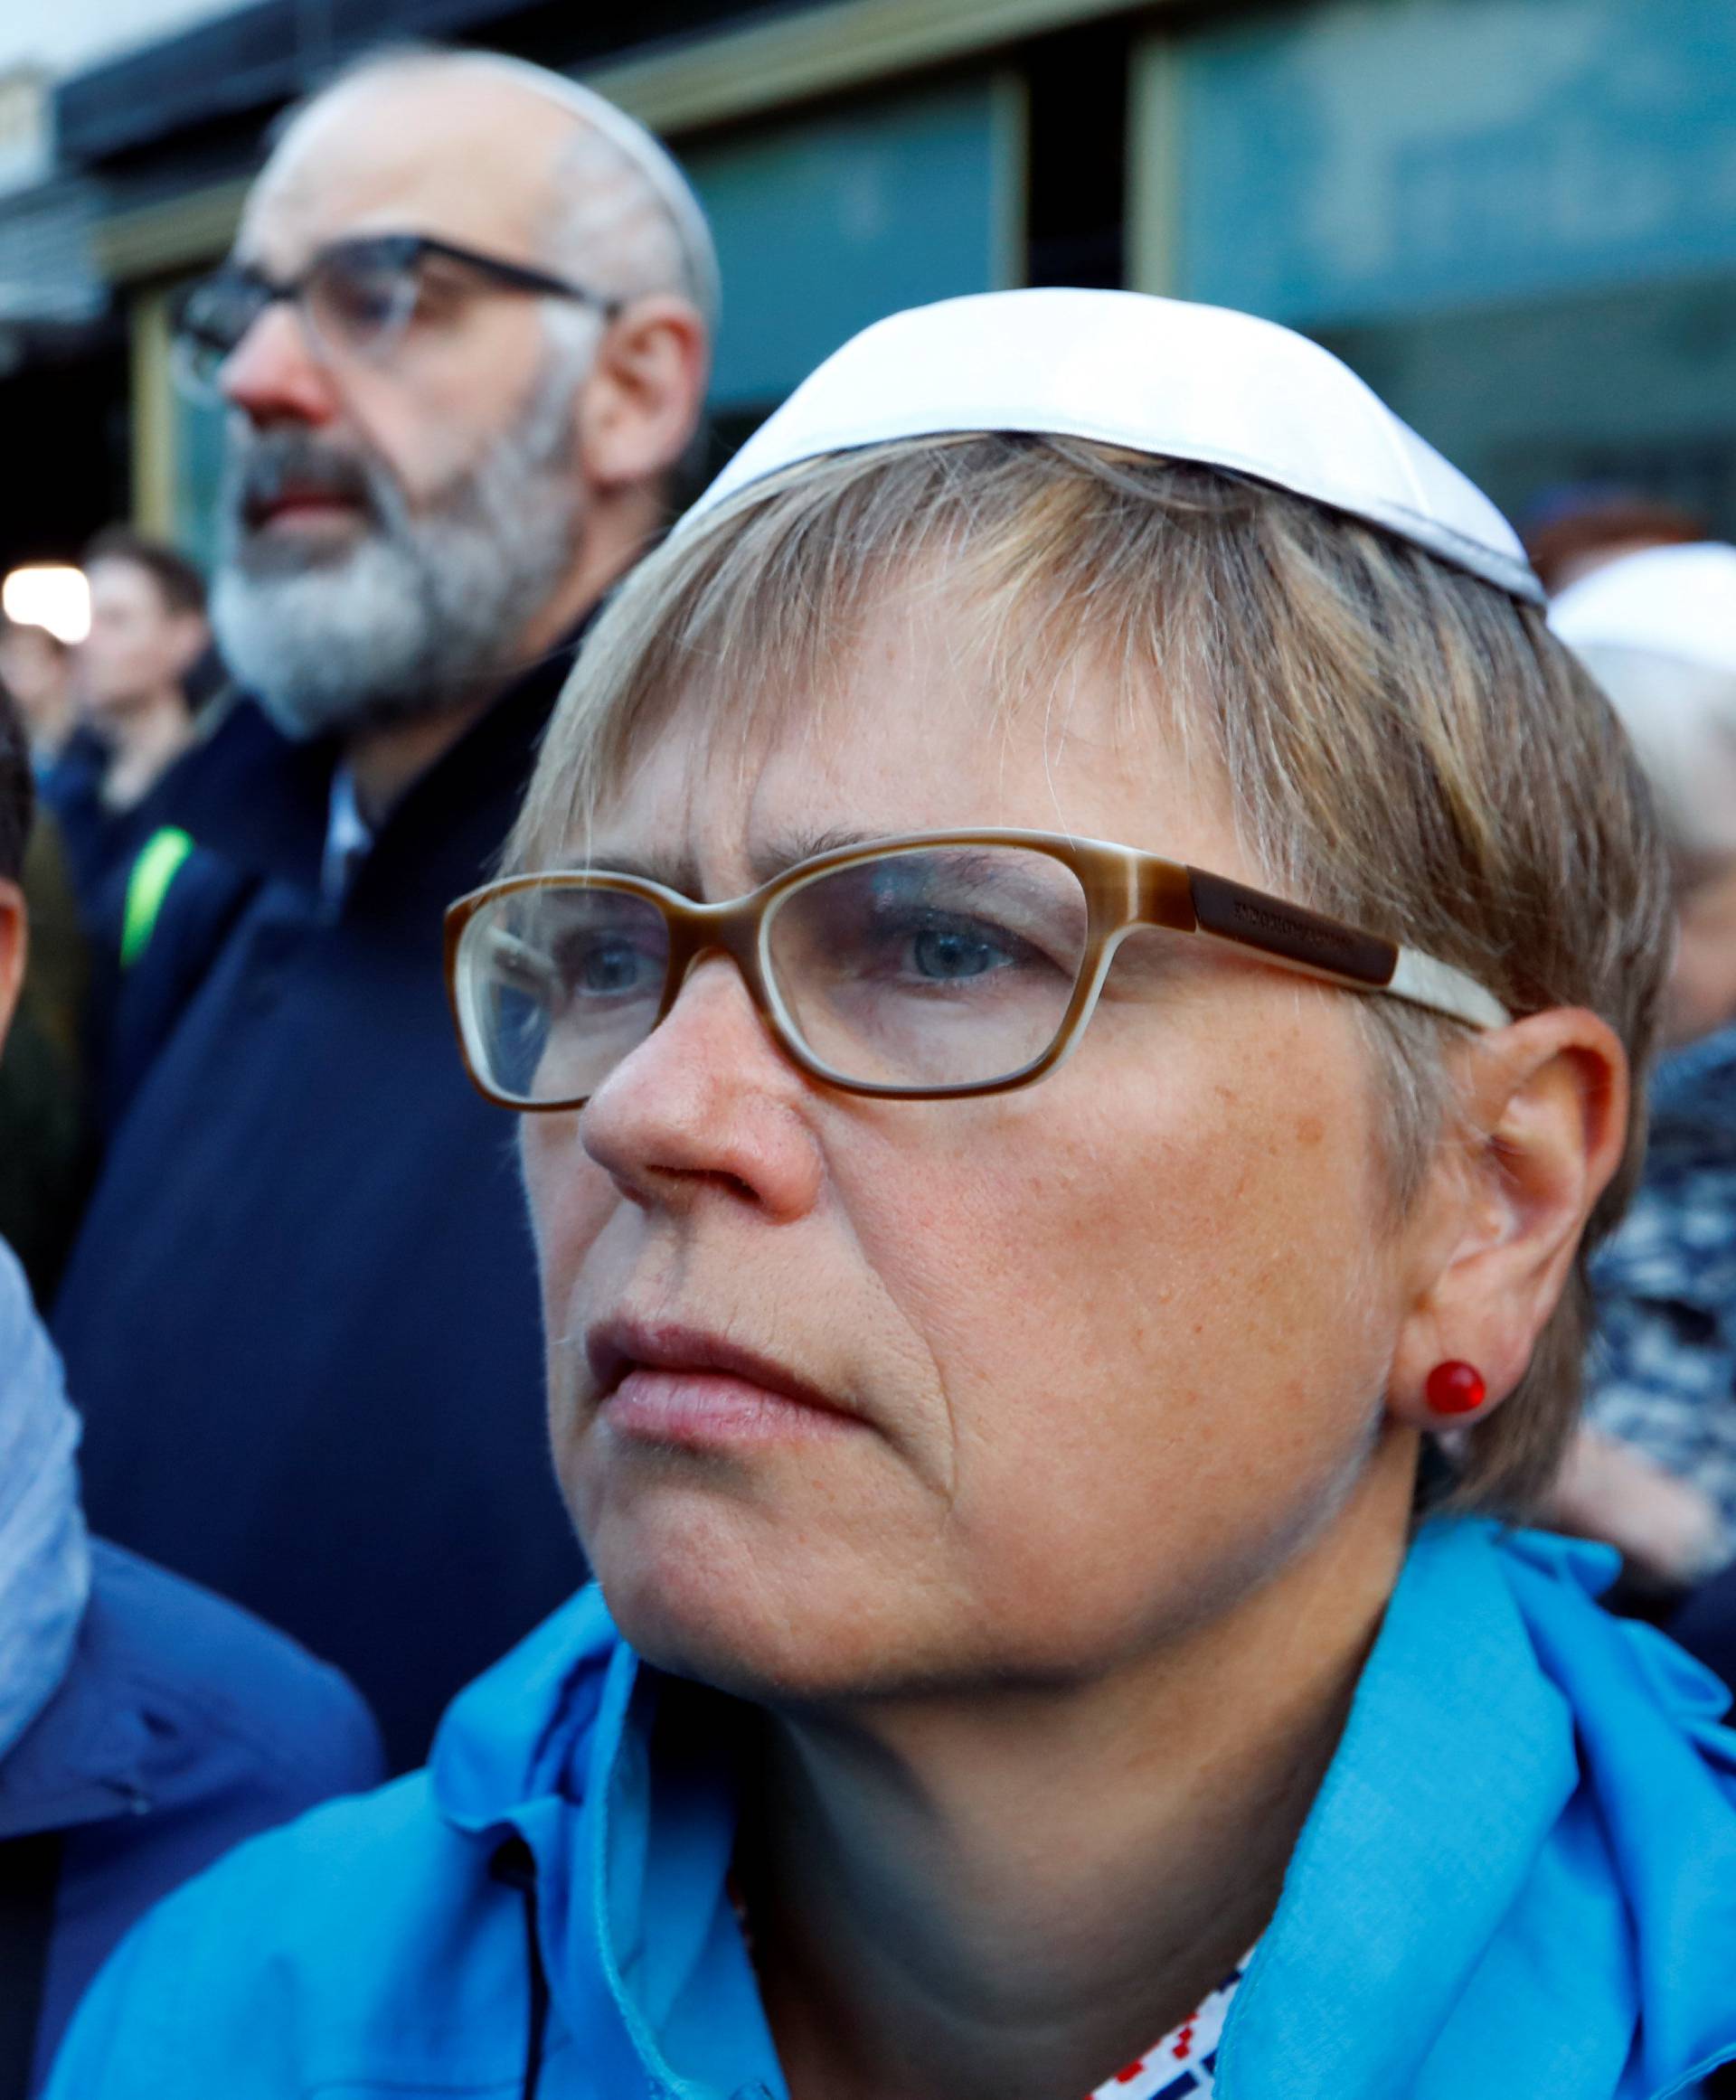 People wear kippas as they attend a demonstration in front of a Jewish synagogue in Berlin